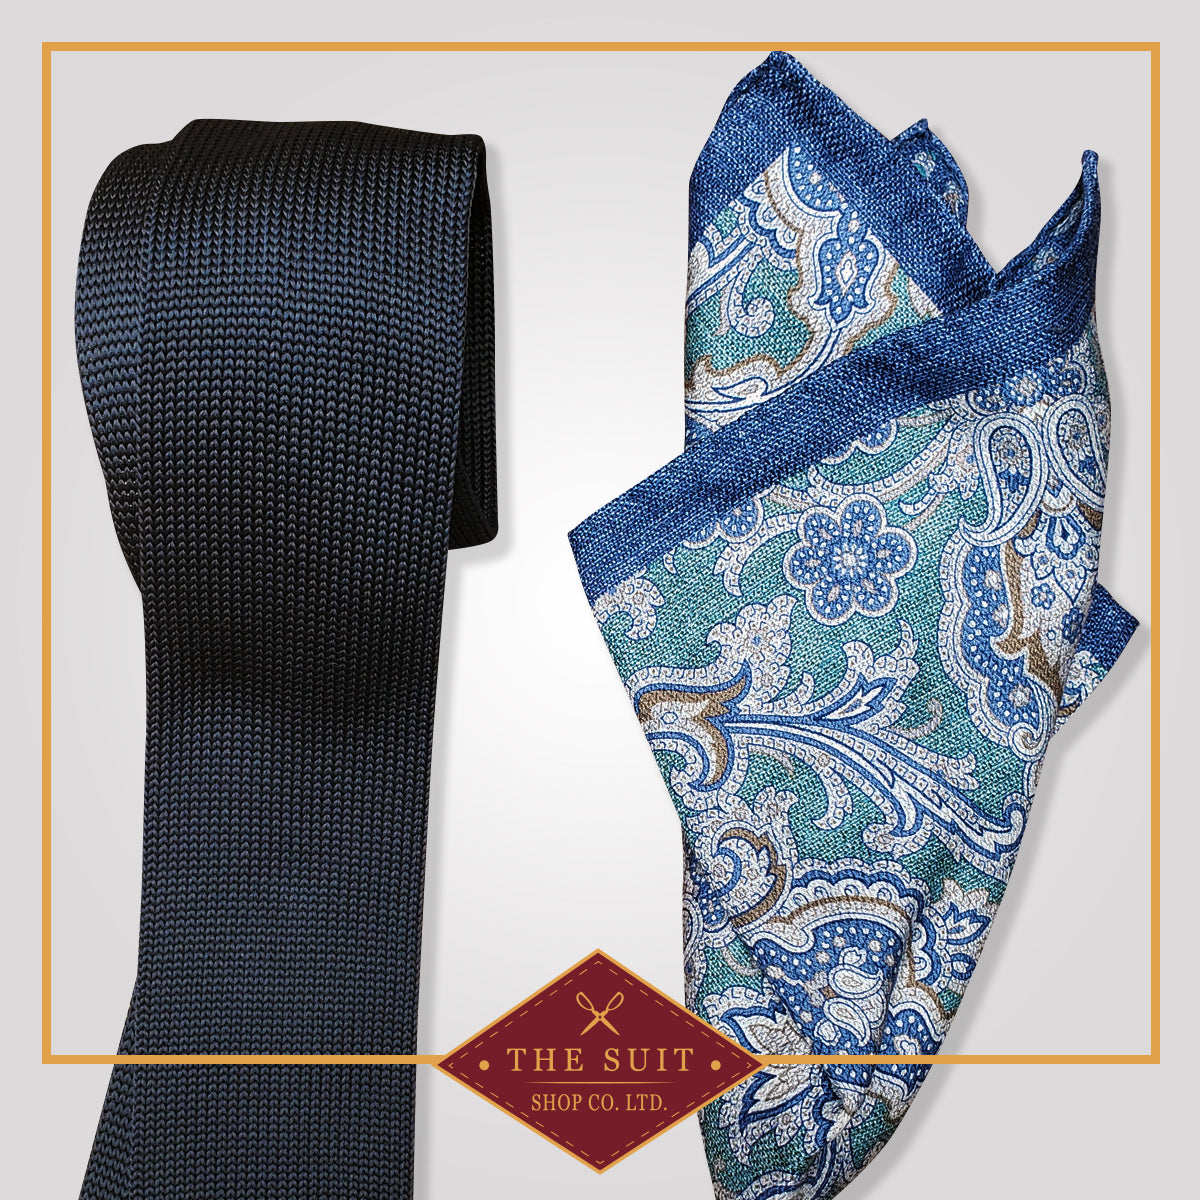 Charade Knit Tie and Cello Patterned Pocket Square